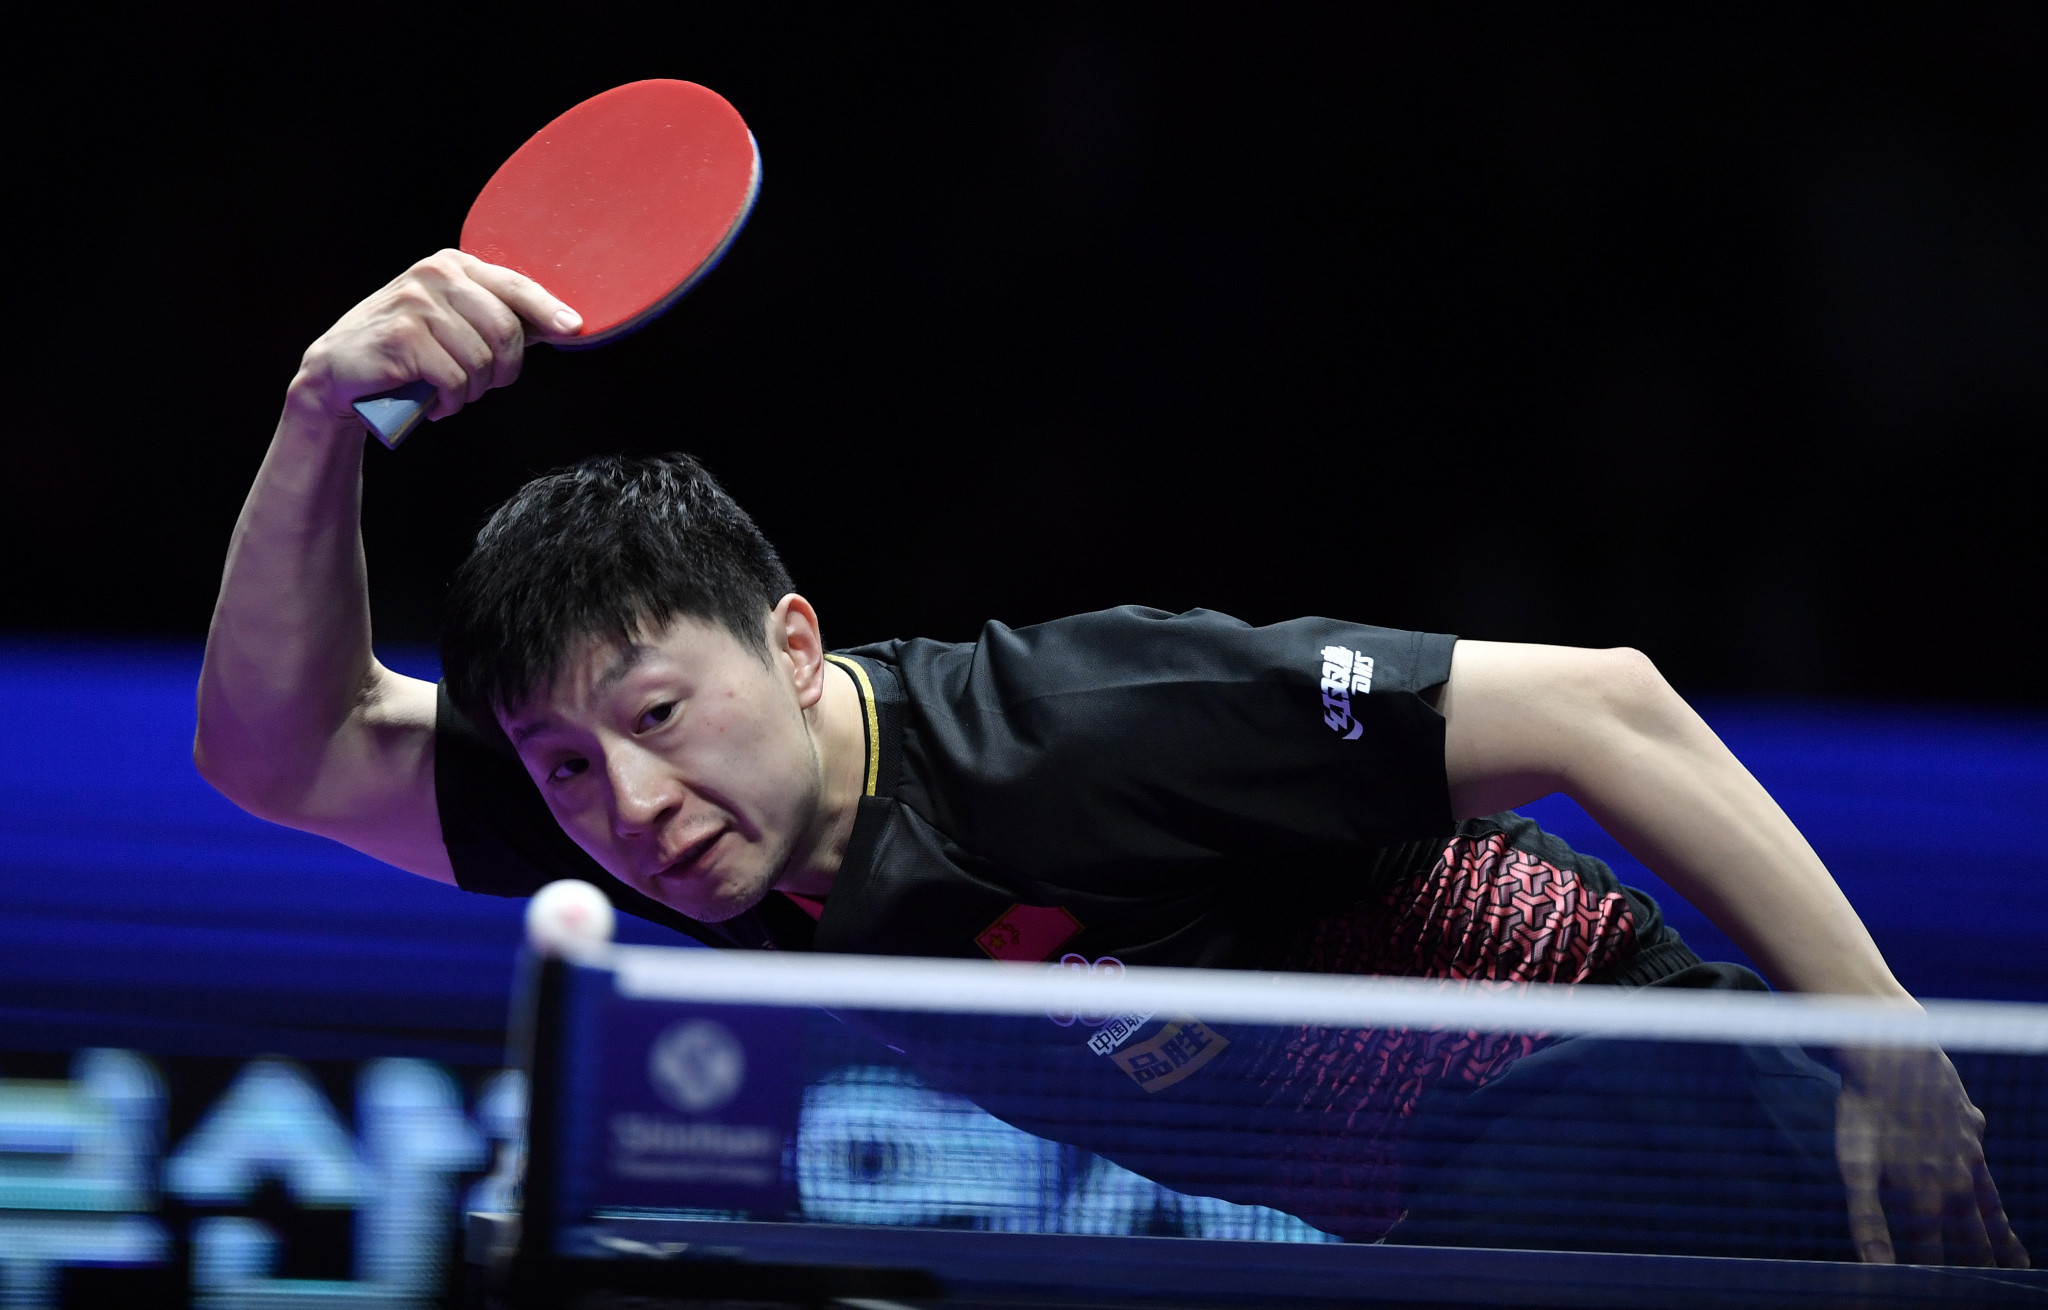 The International Table Tennis Federation gained more than one million new fans last year, they have claimed ©Getty Images